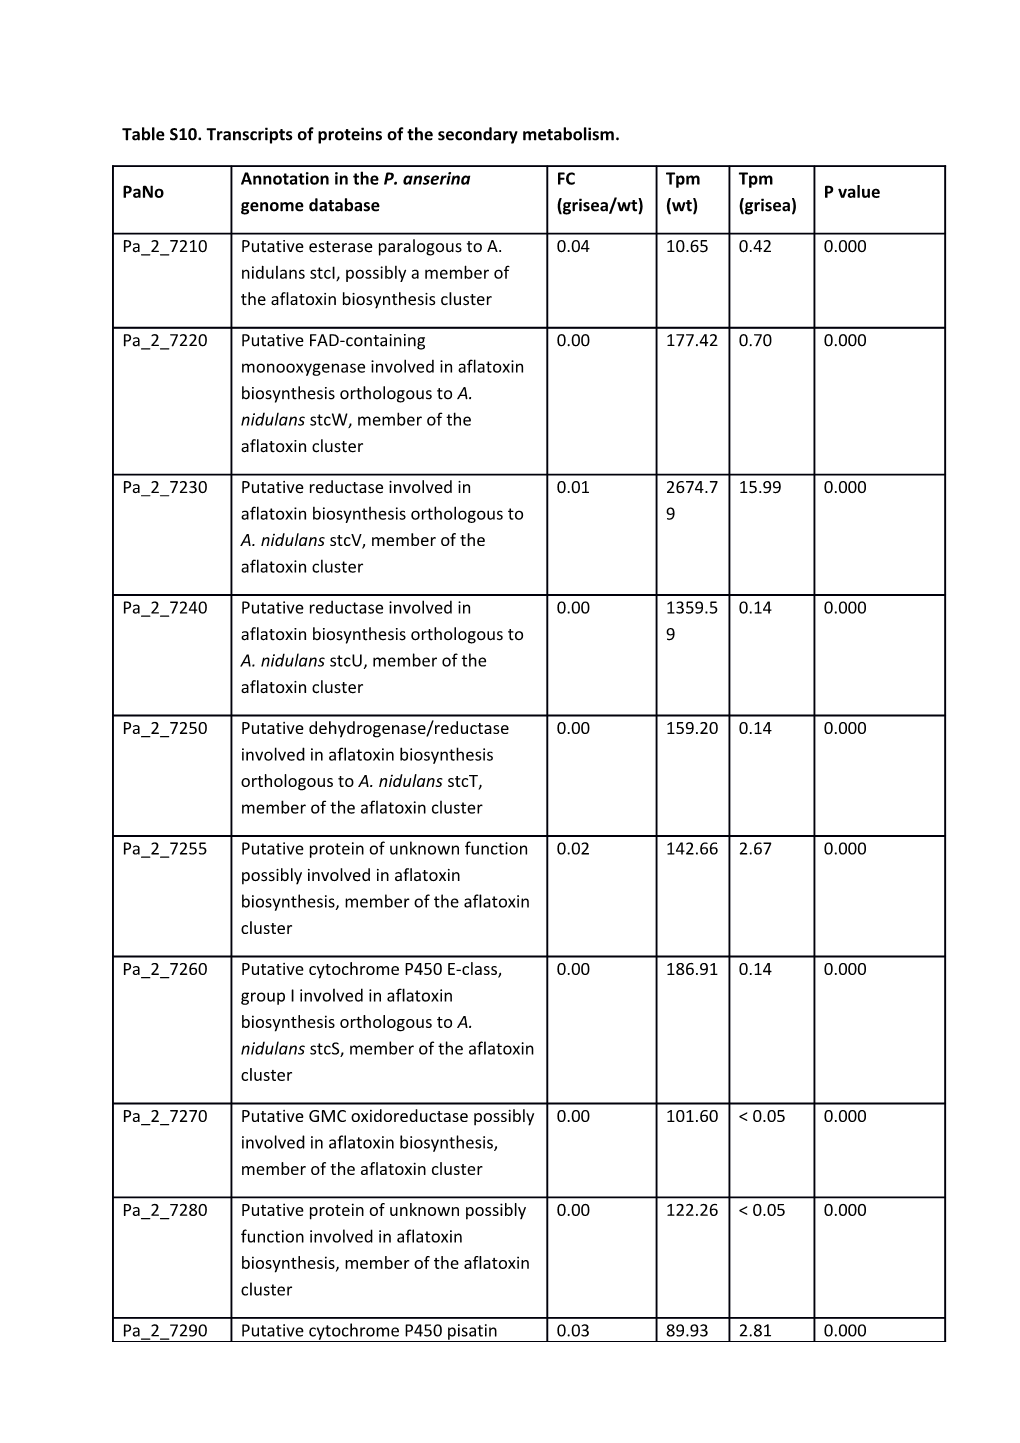 Table S10. Transcripts of Proteins of the Secondary Metabolism